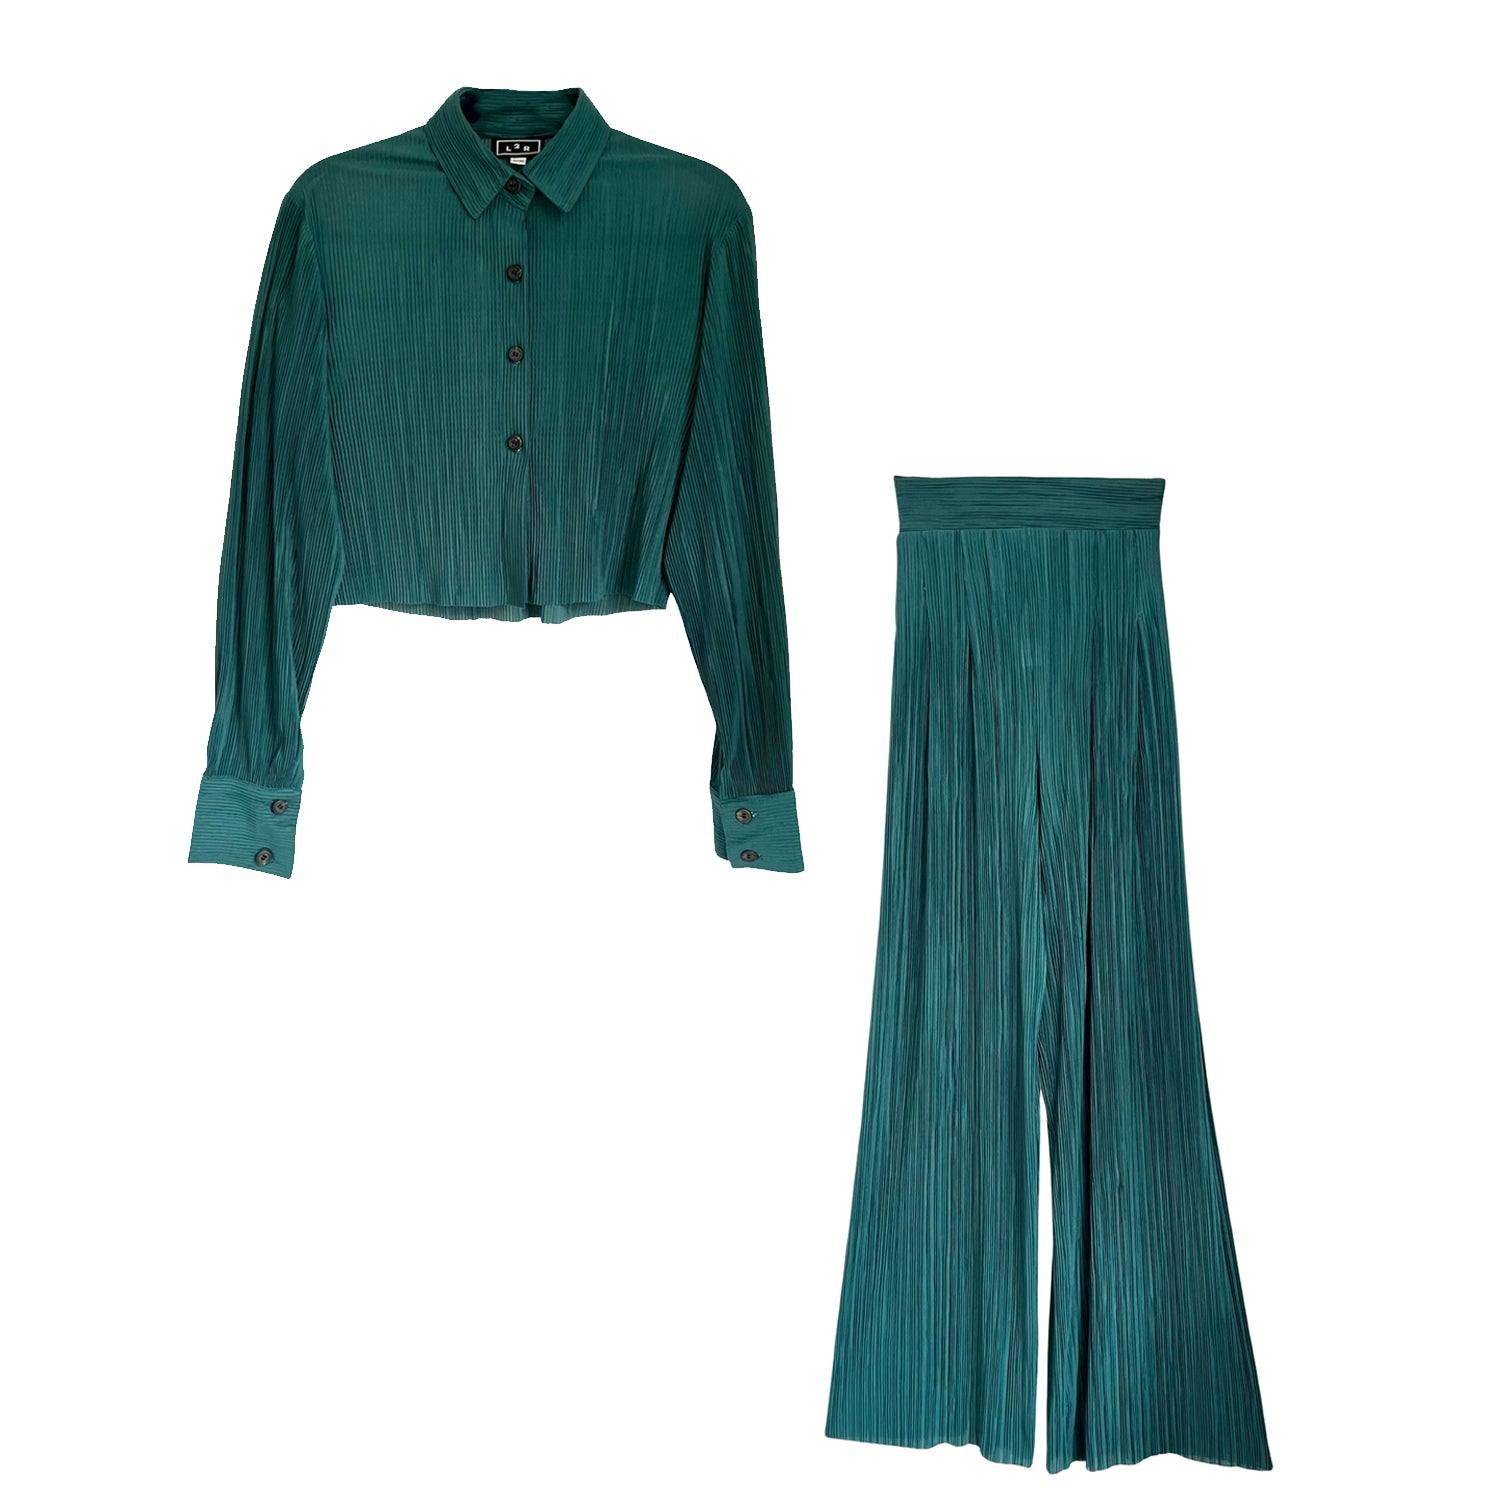 Shirt & Wide-Leg Pants in Pleated Emerald Green